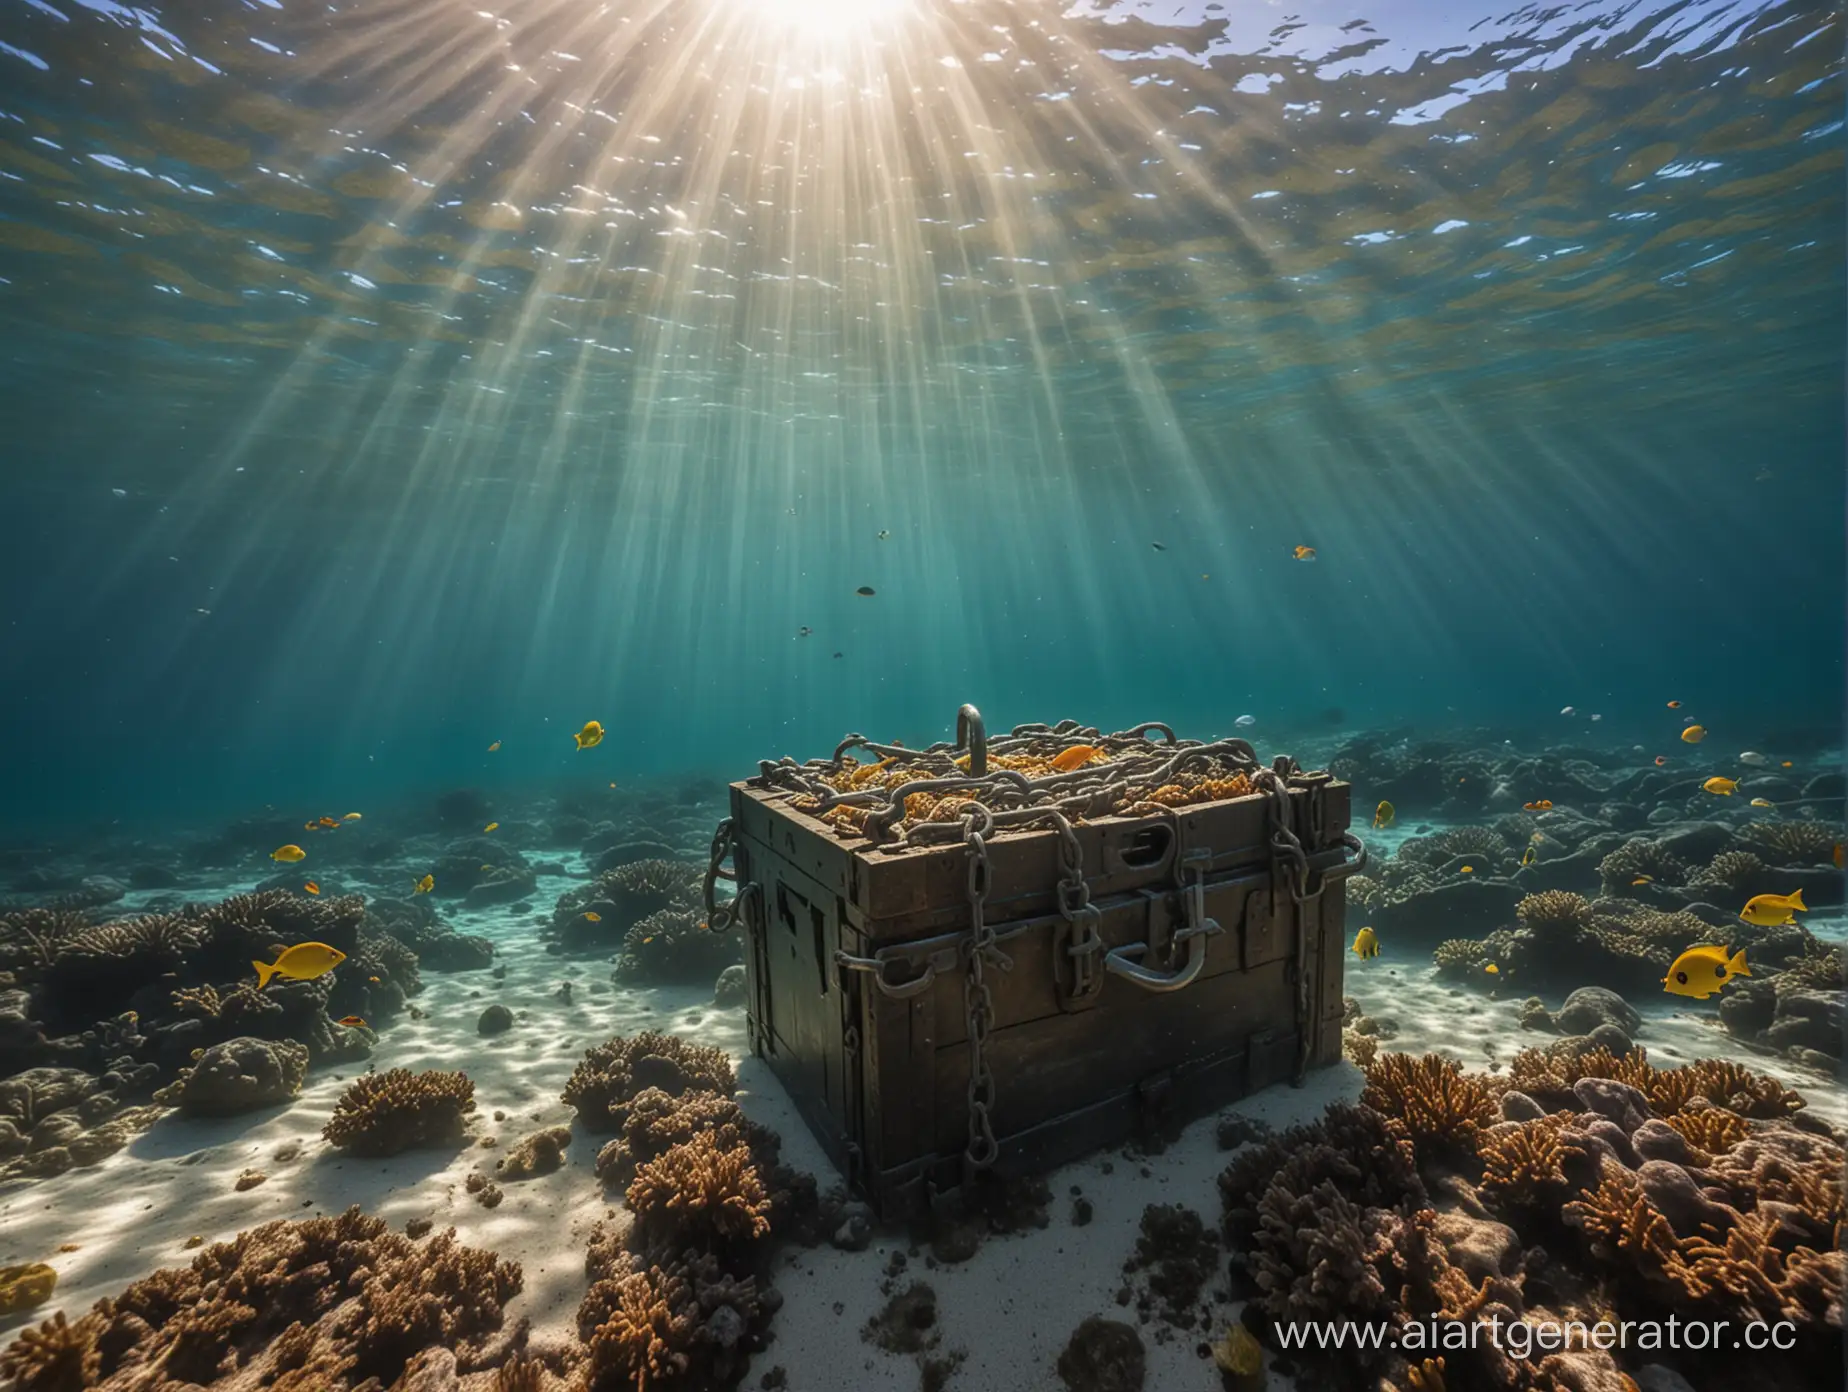 Sunlit-Seabed-Treasure-Locked-Chest-with-Anchor-Chain-and-Colorful-Fish